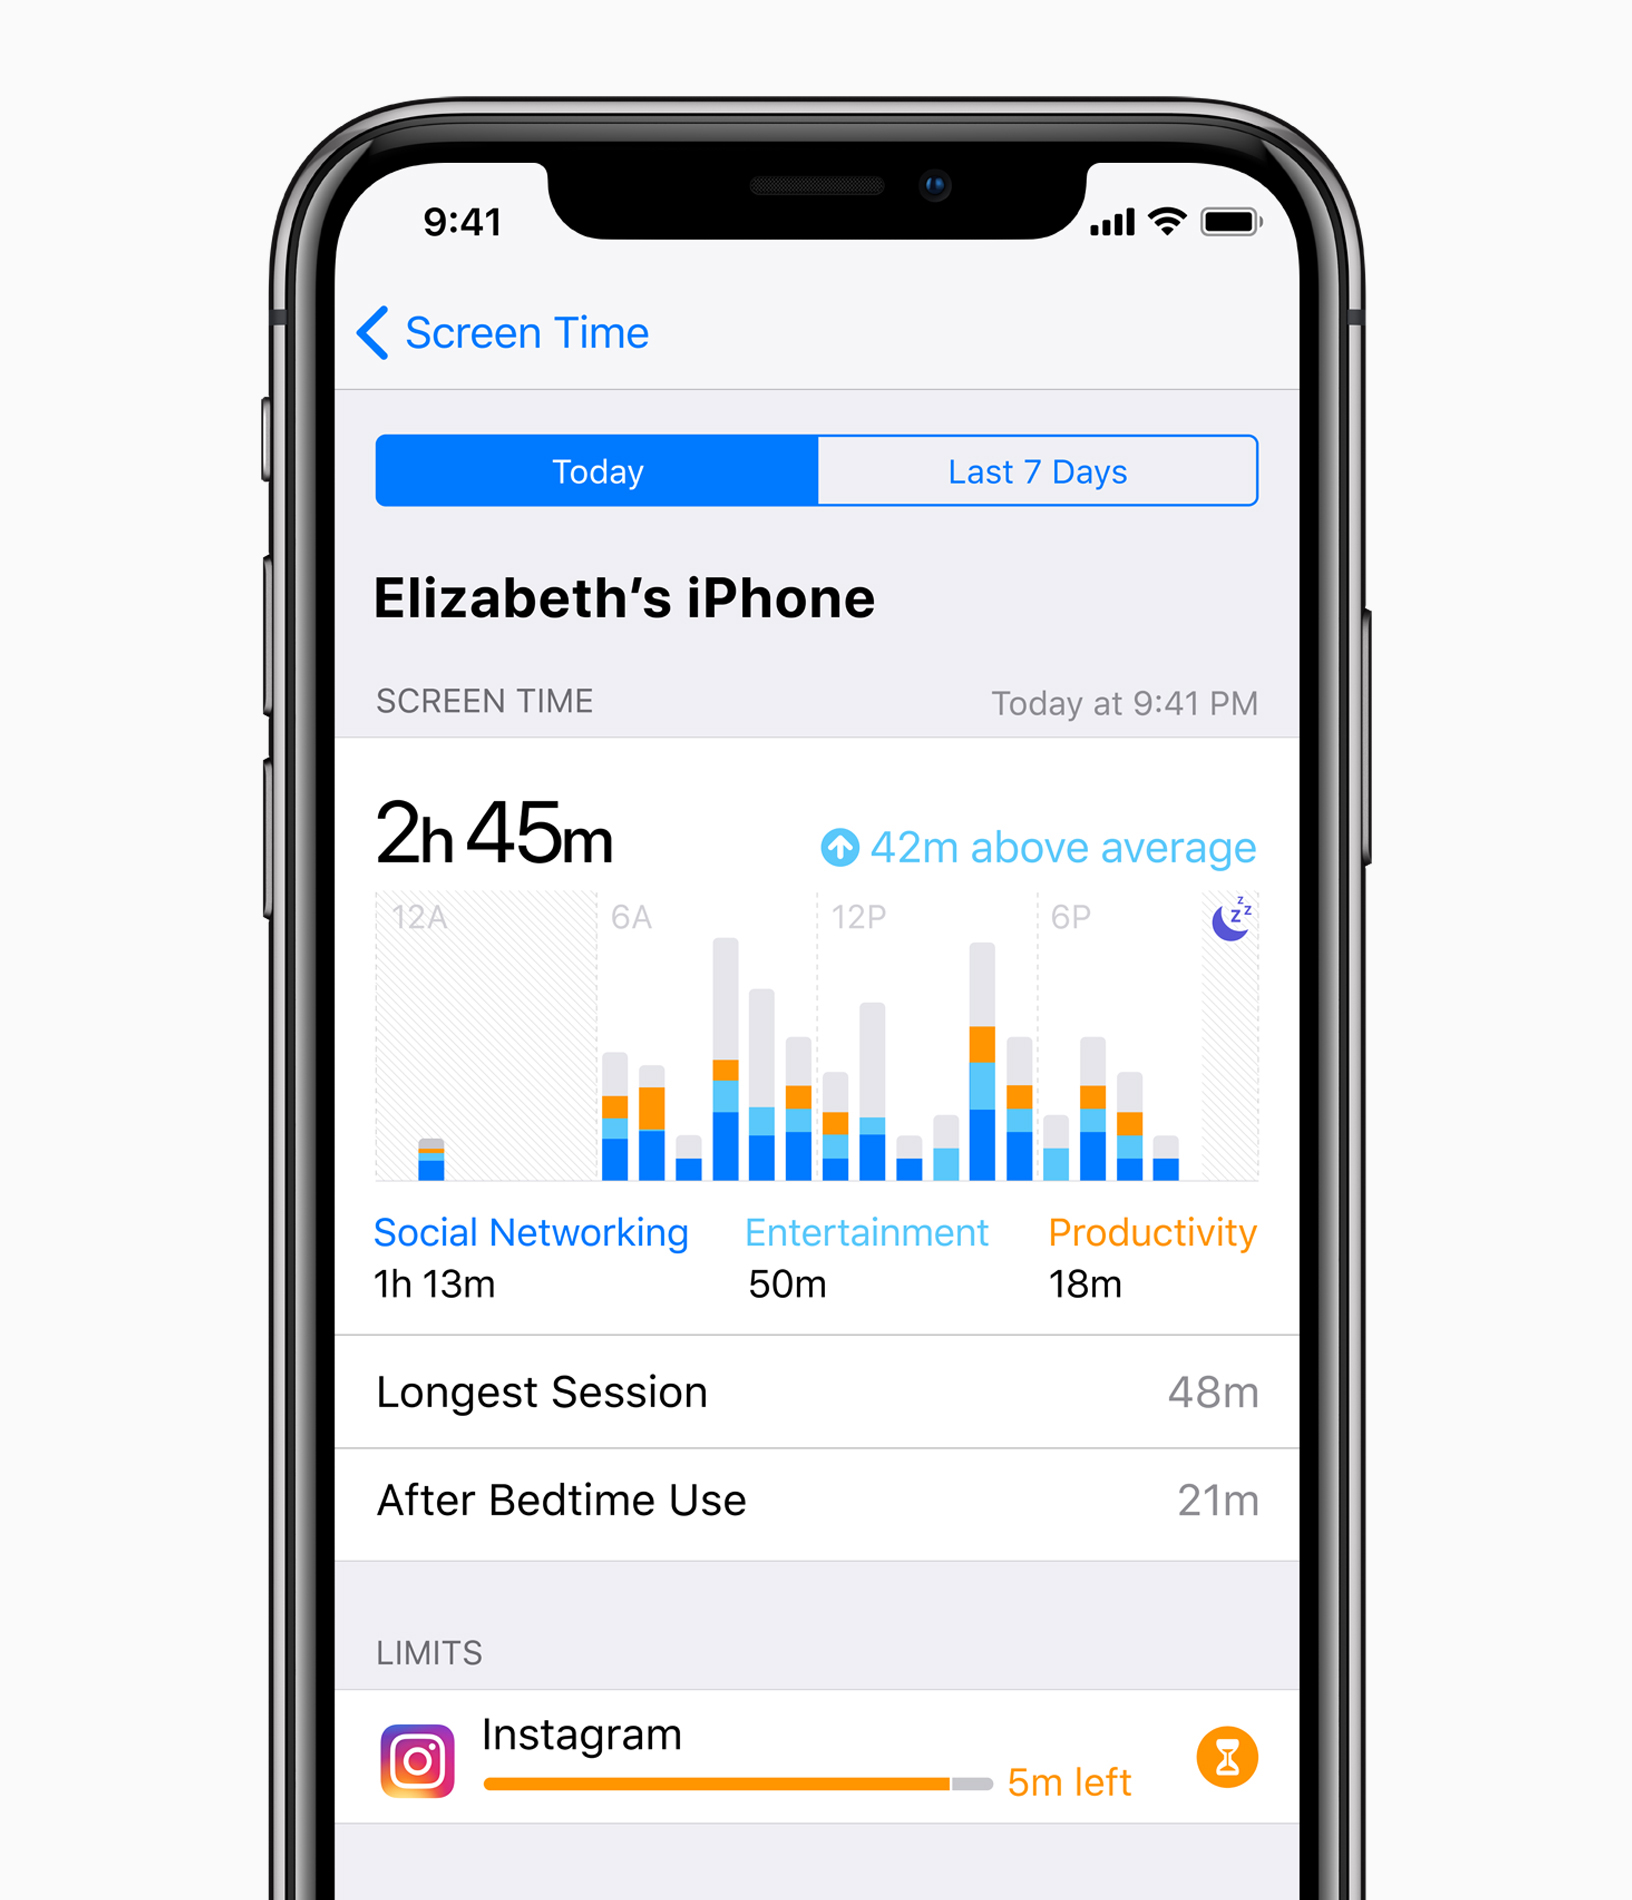 Screenshot of the iOS Screen Time dashboard. Includes total time, longest session duration, after bedtime use, and application limits.